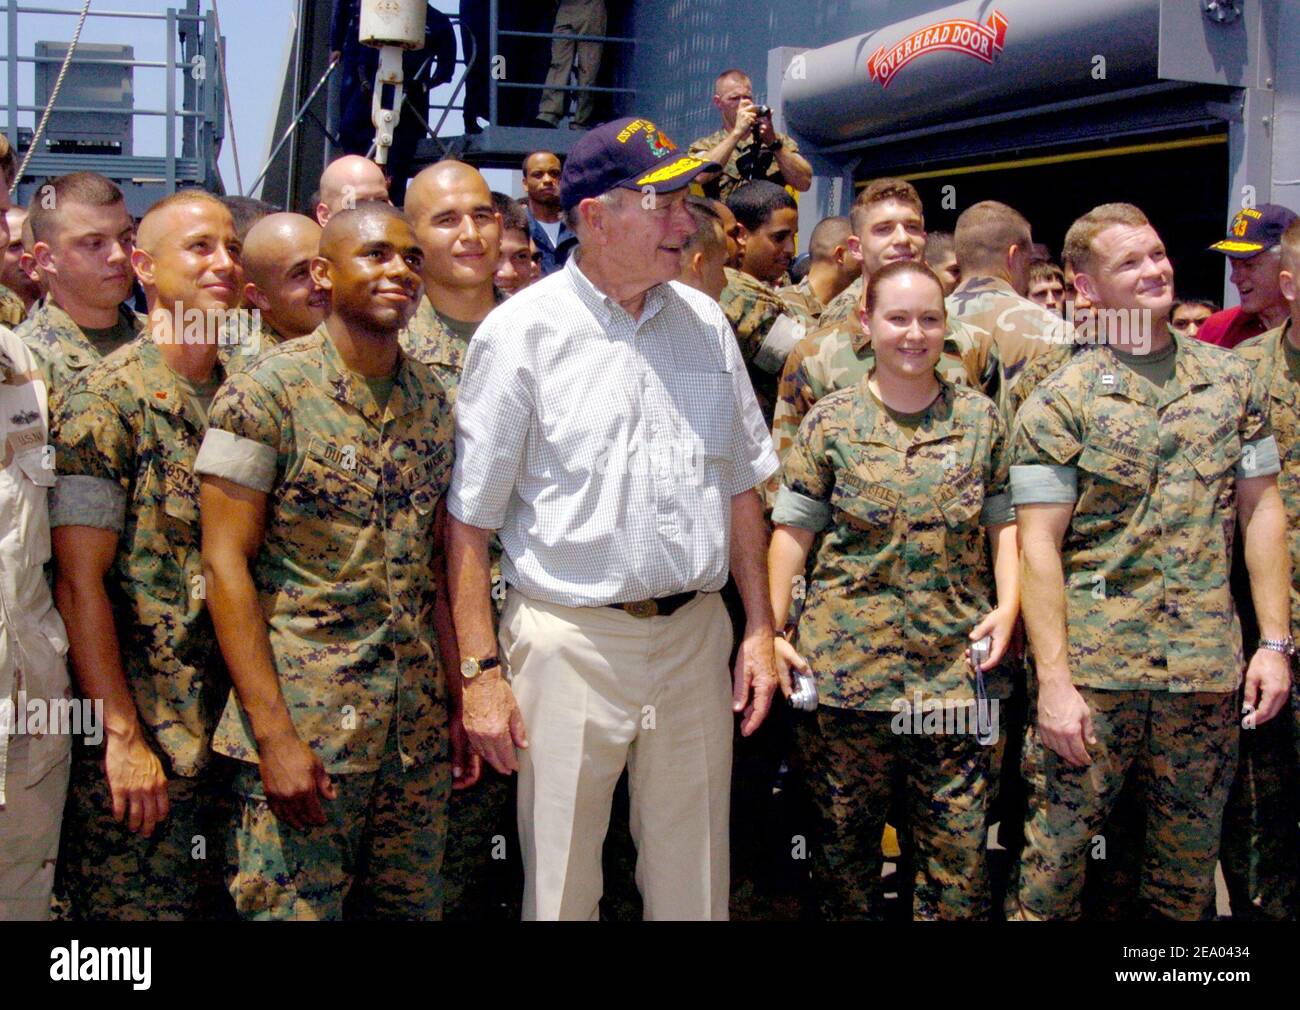 Former President George H. W. Bush is flanked by Marines while posing for a photo aboard the amphibious dock landing ship USS Fort McHenry (LSD 43). Sailors and Marines greeted former President Bill Clinton and George H. W. Bush as they toured Sri Lanka, Thailand and Indonesia to see first hand, the effects the tsunami had on Southeast Asia on February 20, 2005. Photo Michael D. Kennedy/USN via ABACA. Stock Photo